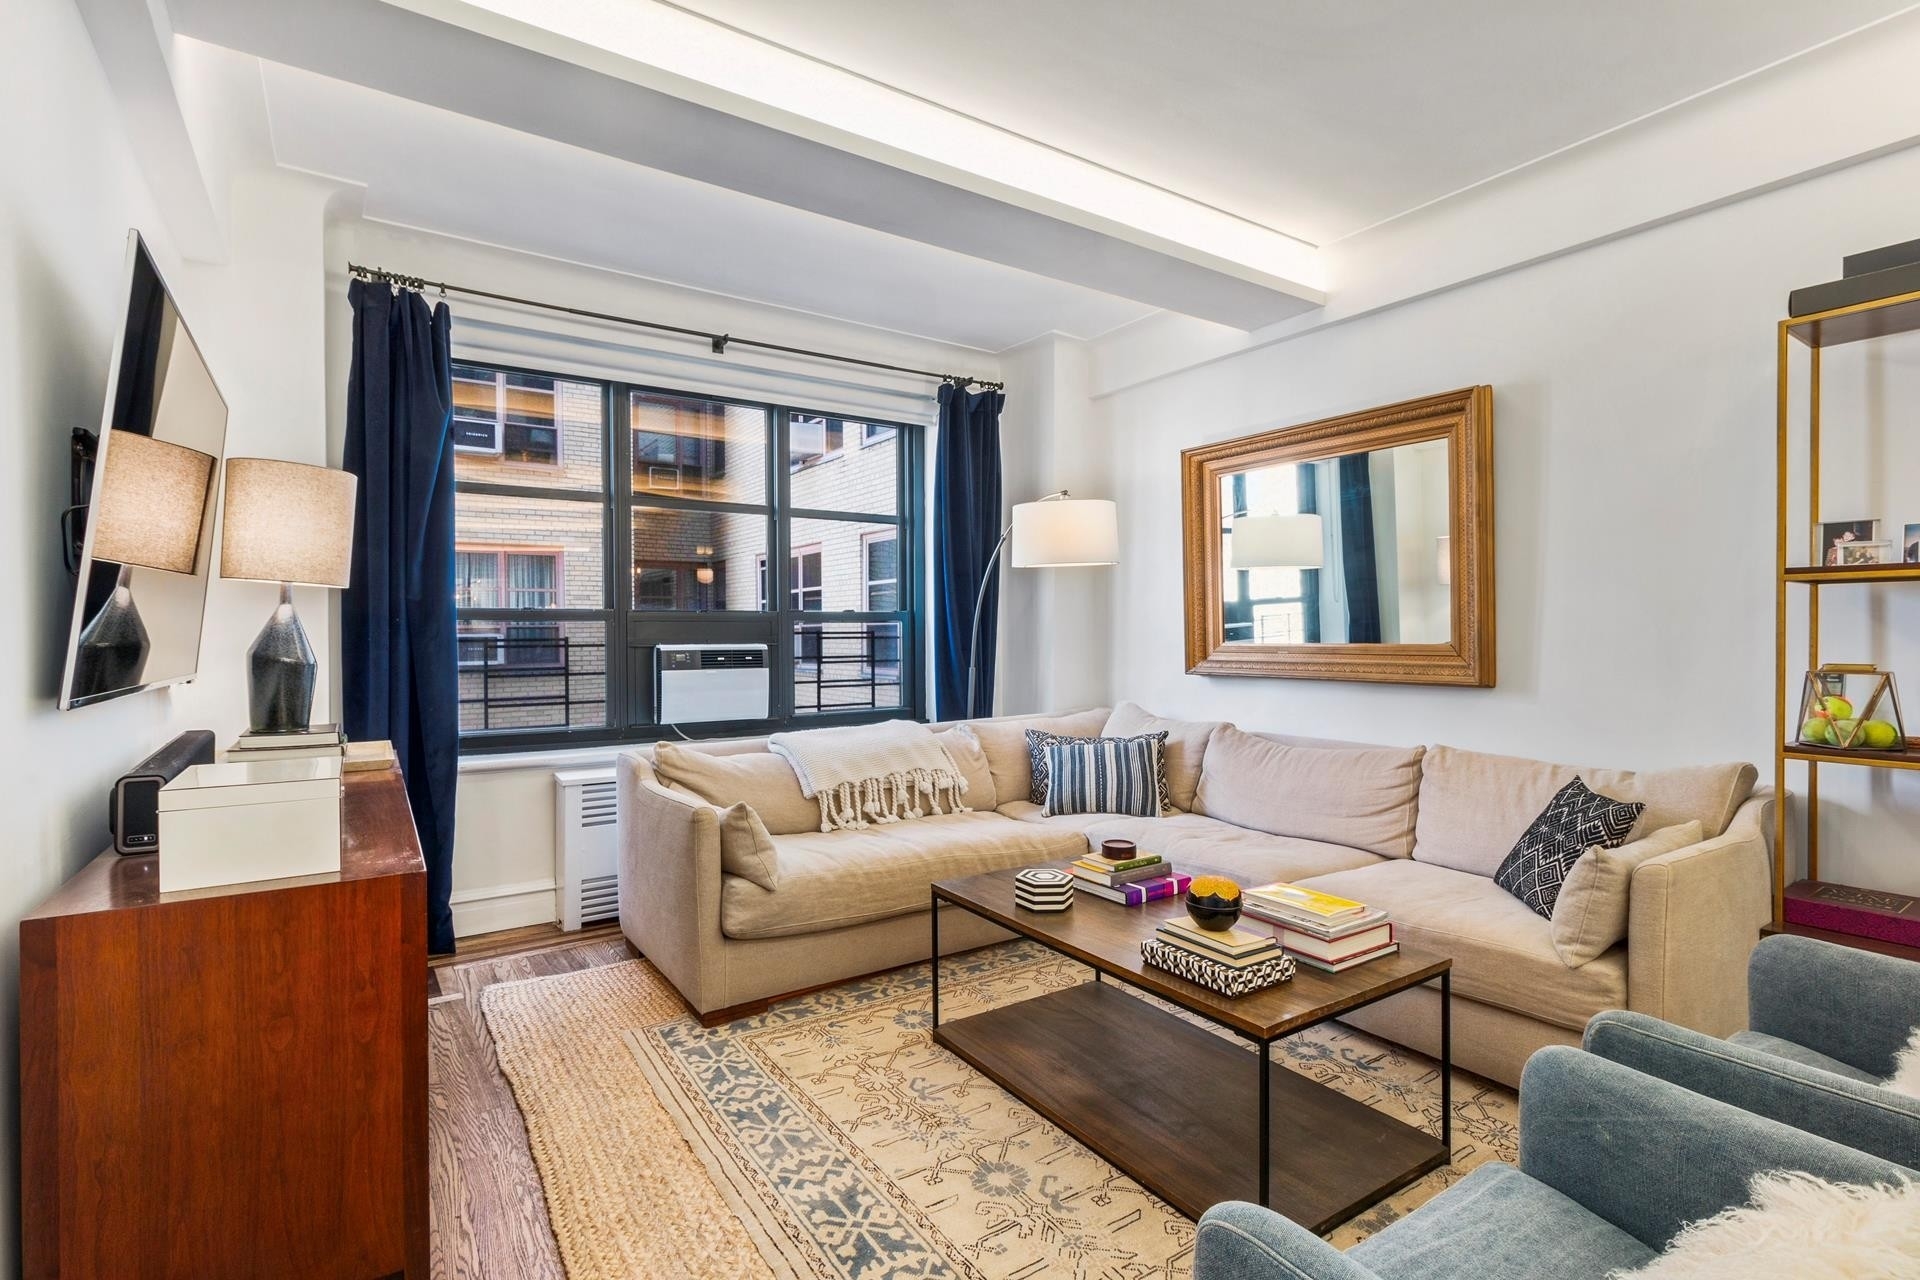 Co-op Properties for Sale at Gramercy House, 235 E 22ND ST, 11T Gramercy Park, New York, NY 10010